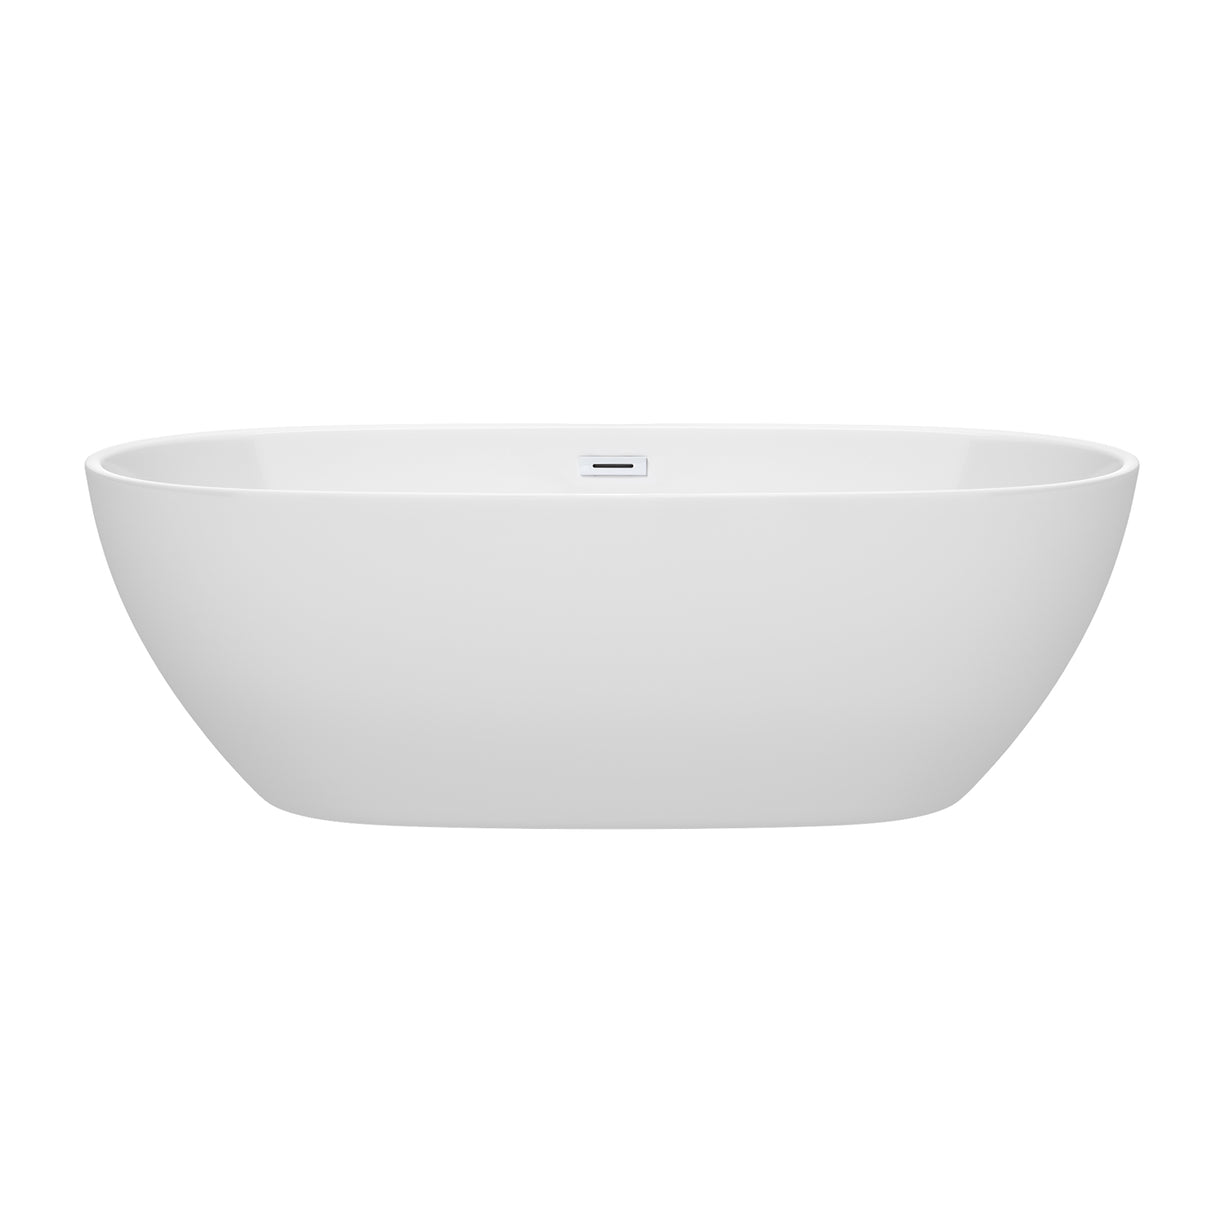 Juno 71 Inch Freestanding Bathtub in White with Shiny White Drain and Overflow Trim